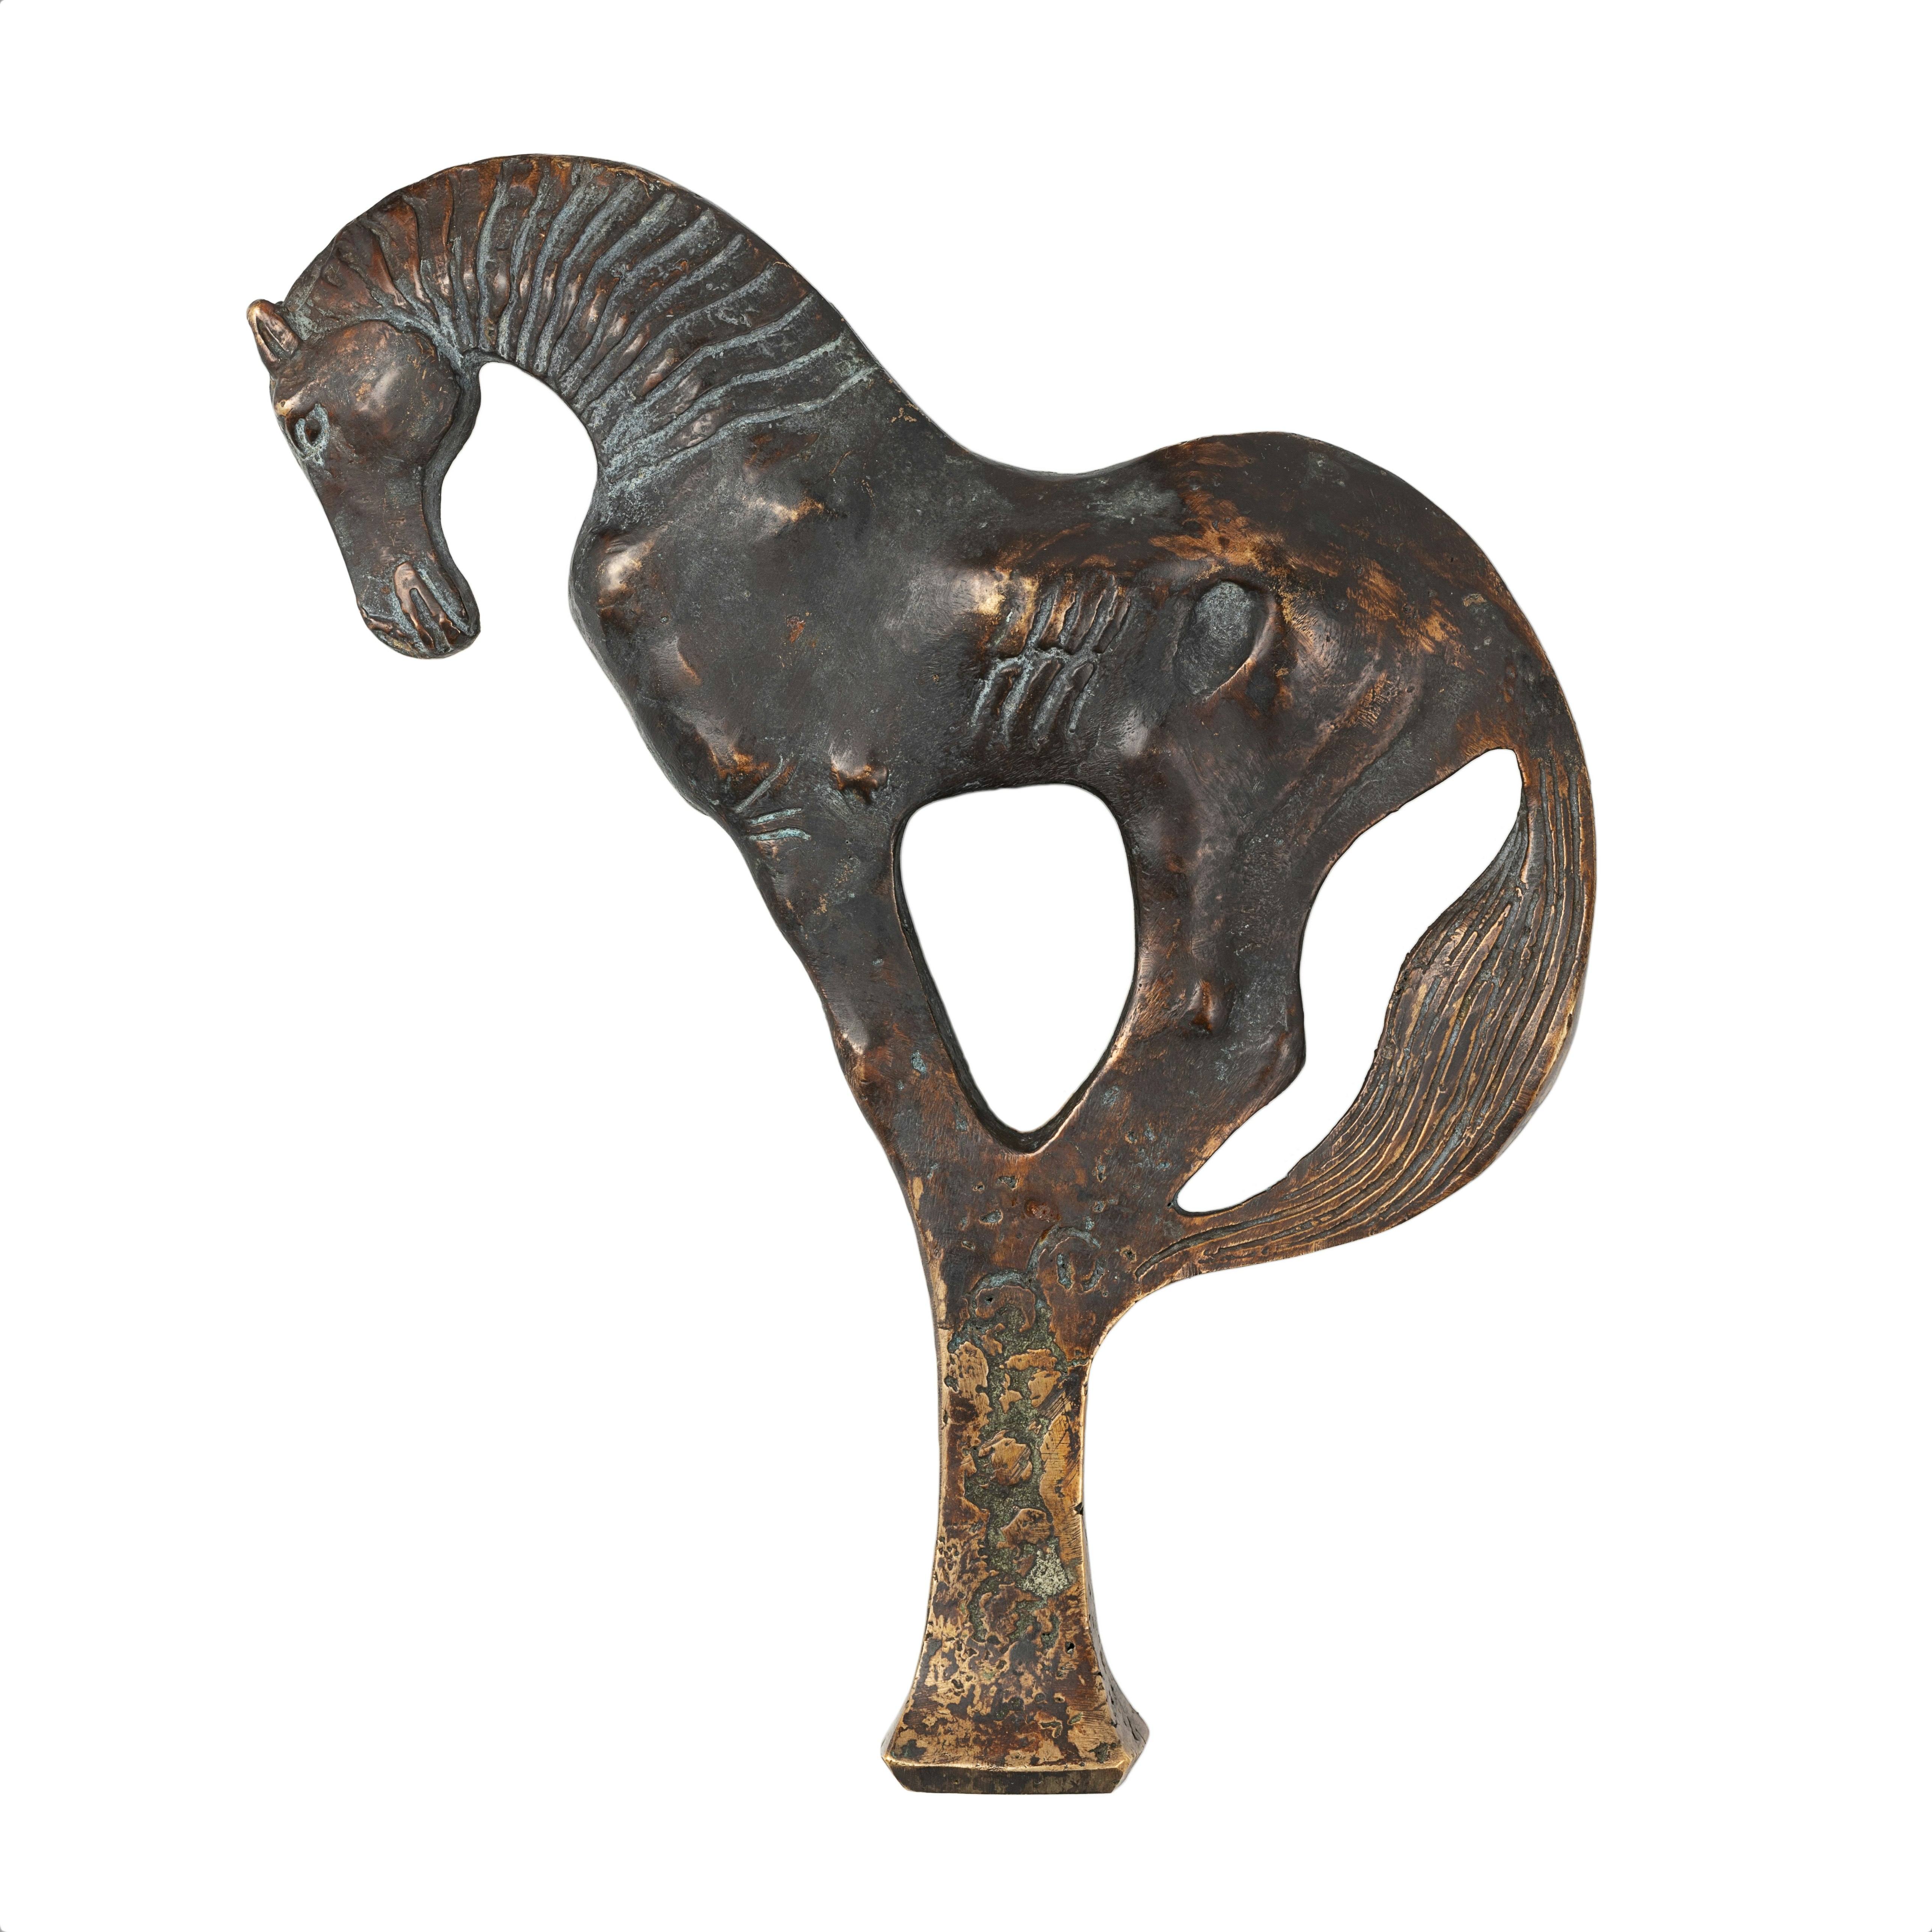 The Heavenly Horse. Ceremonial bronze finial with standing horse, 4th-1st century BCE.
Ferghana "heavenly" horses belong to one of the world's earliest known cultural breeds of racehorses, a fast and light Eastern type, perfectly suited for cavalry. They are the ancestors of all the best Asian horse breeds: Arabian, Turkmen (Akhal-Teke), and Kyrgyz.